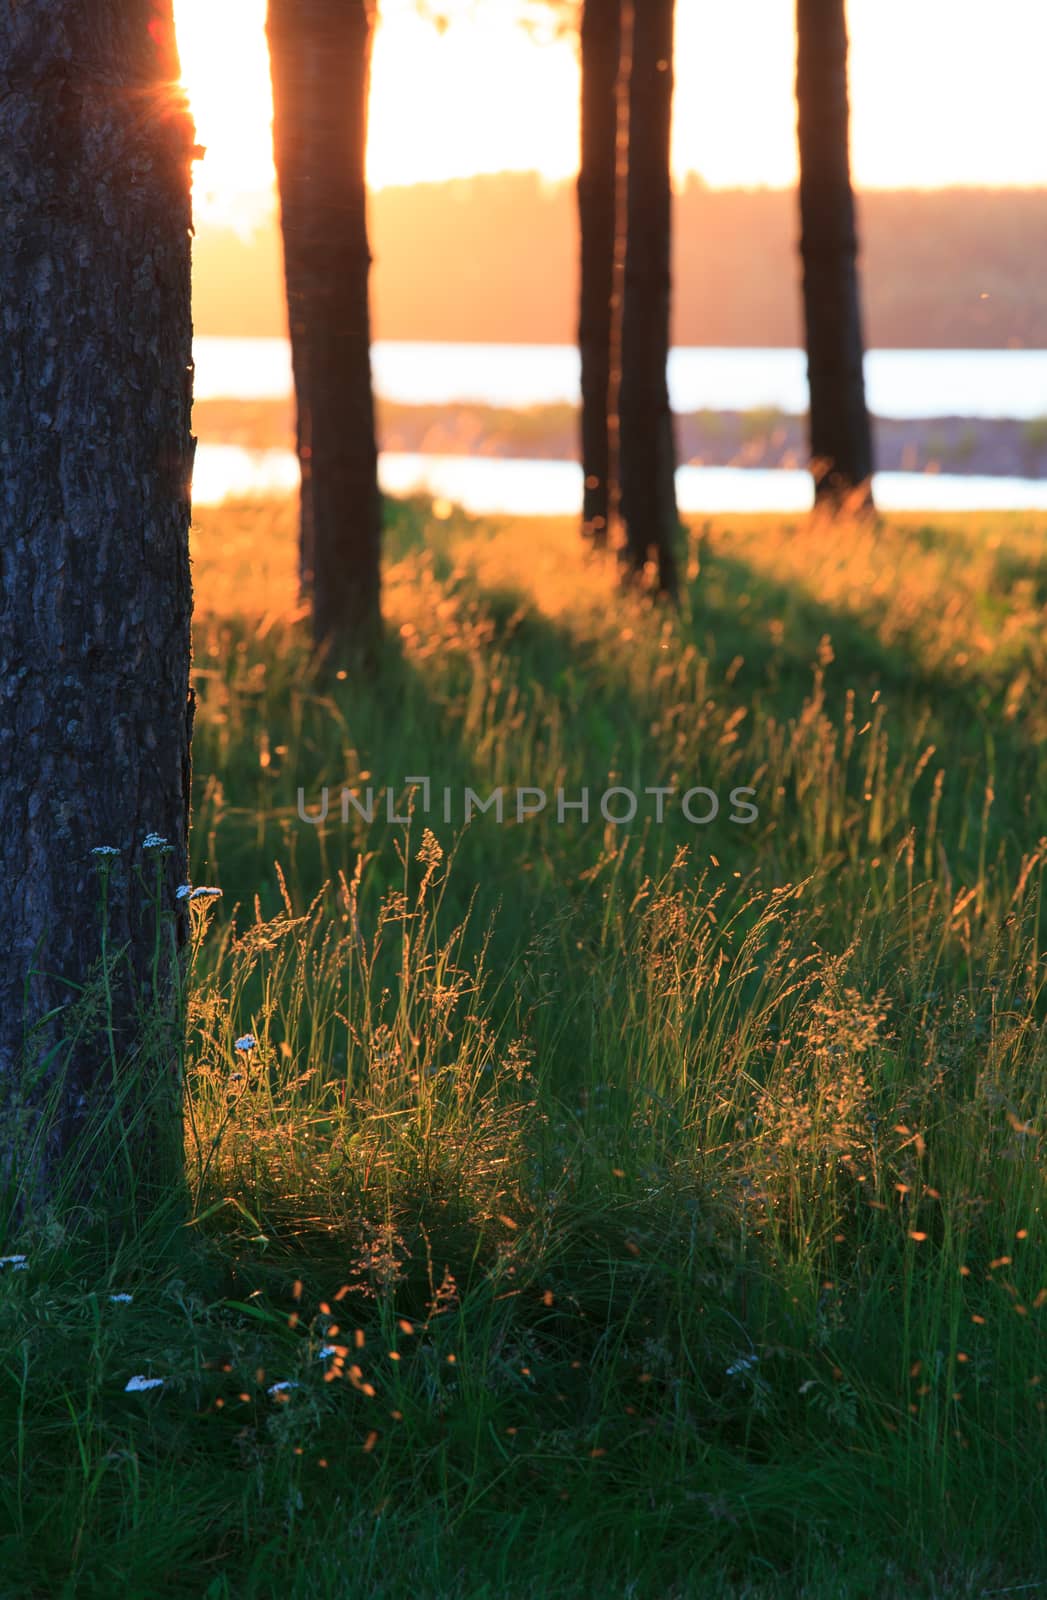 Sunset and trees at meadow by juhku